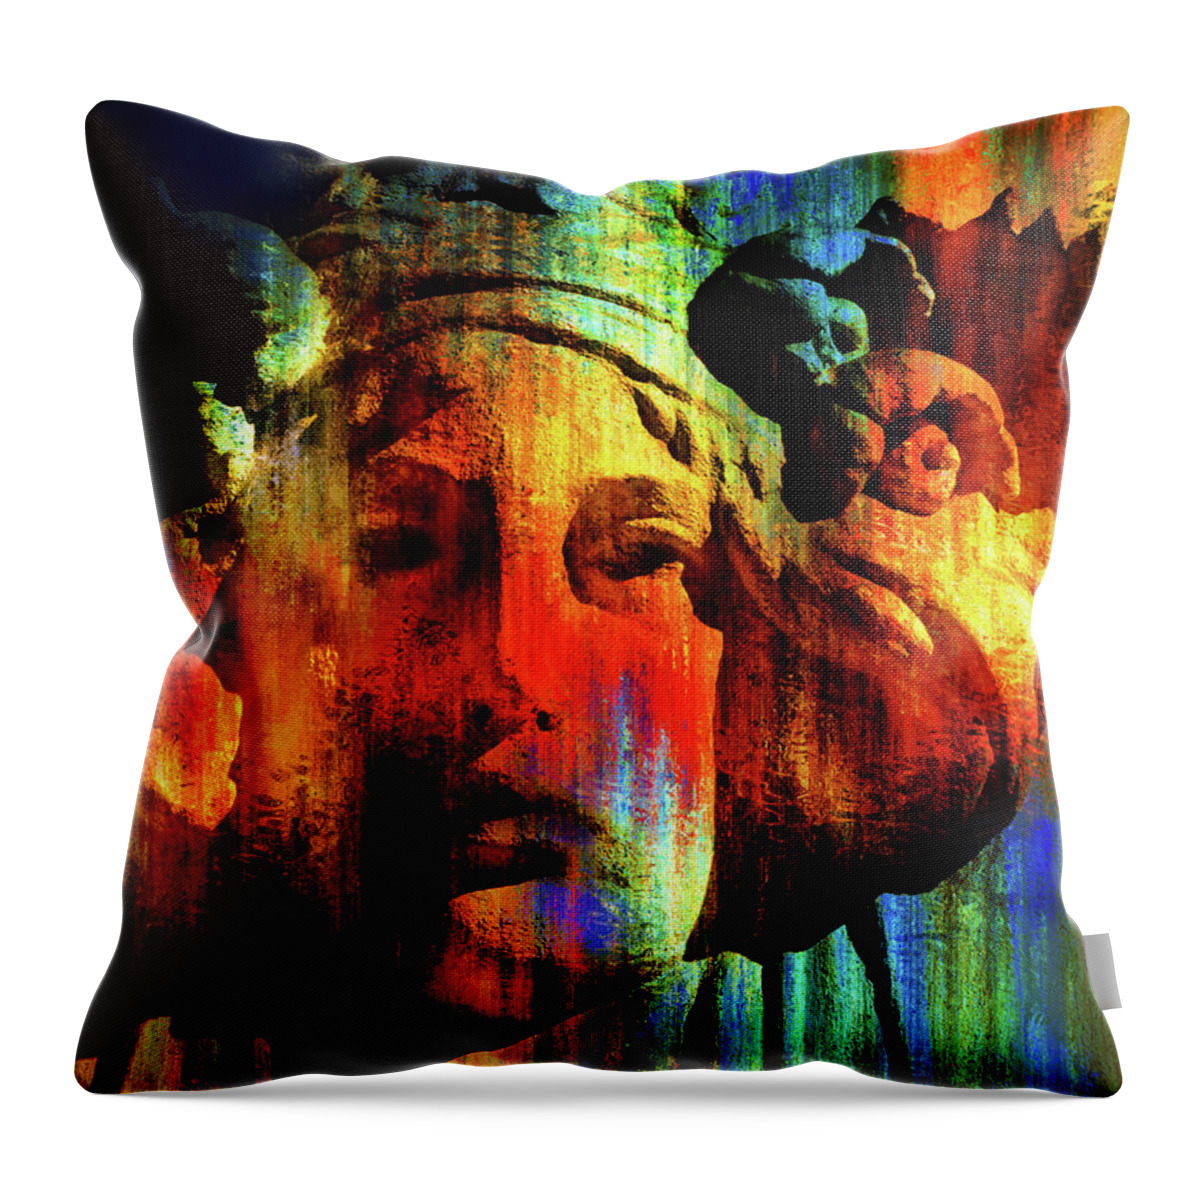 Haunted Dreams Throw Pillow featuring the digital art Haunted Dreams Abstract Realism by Georgiana Romanovna